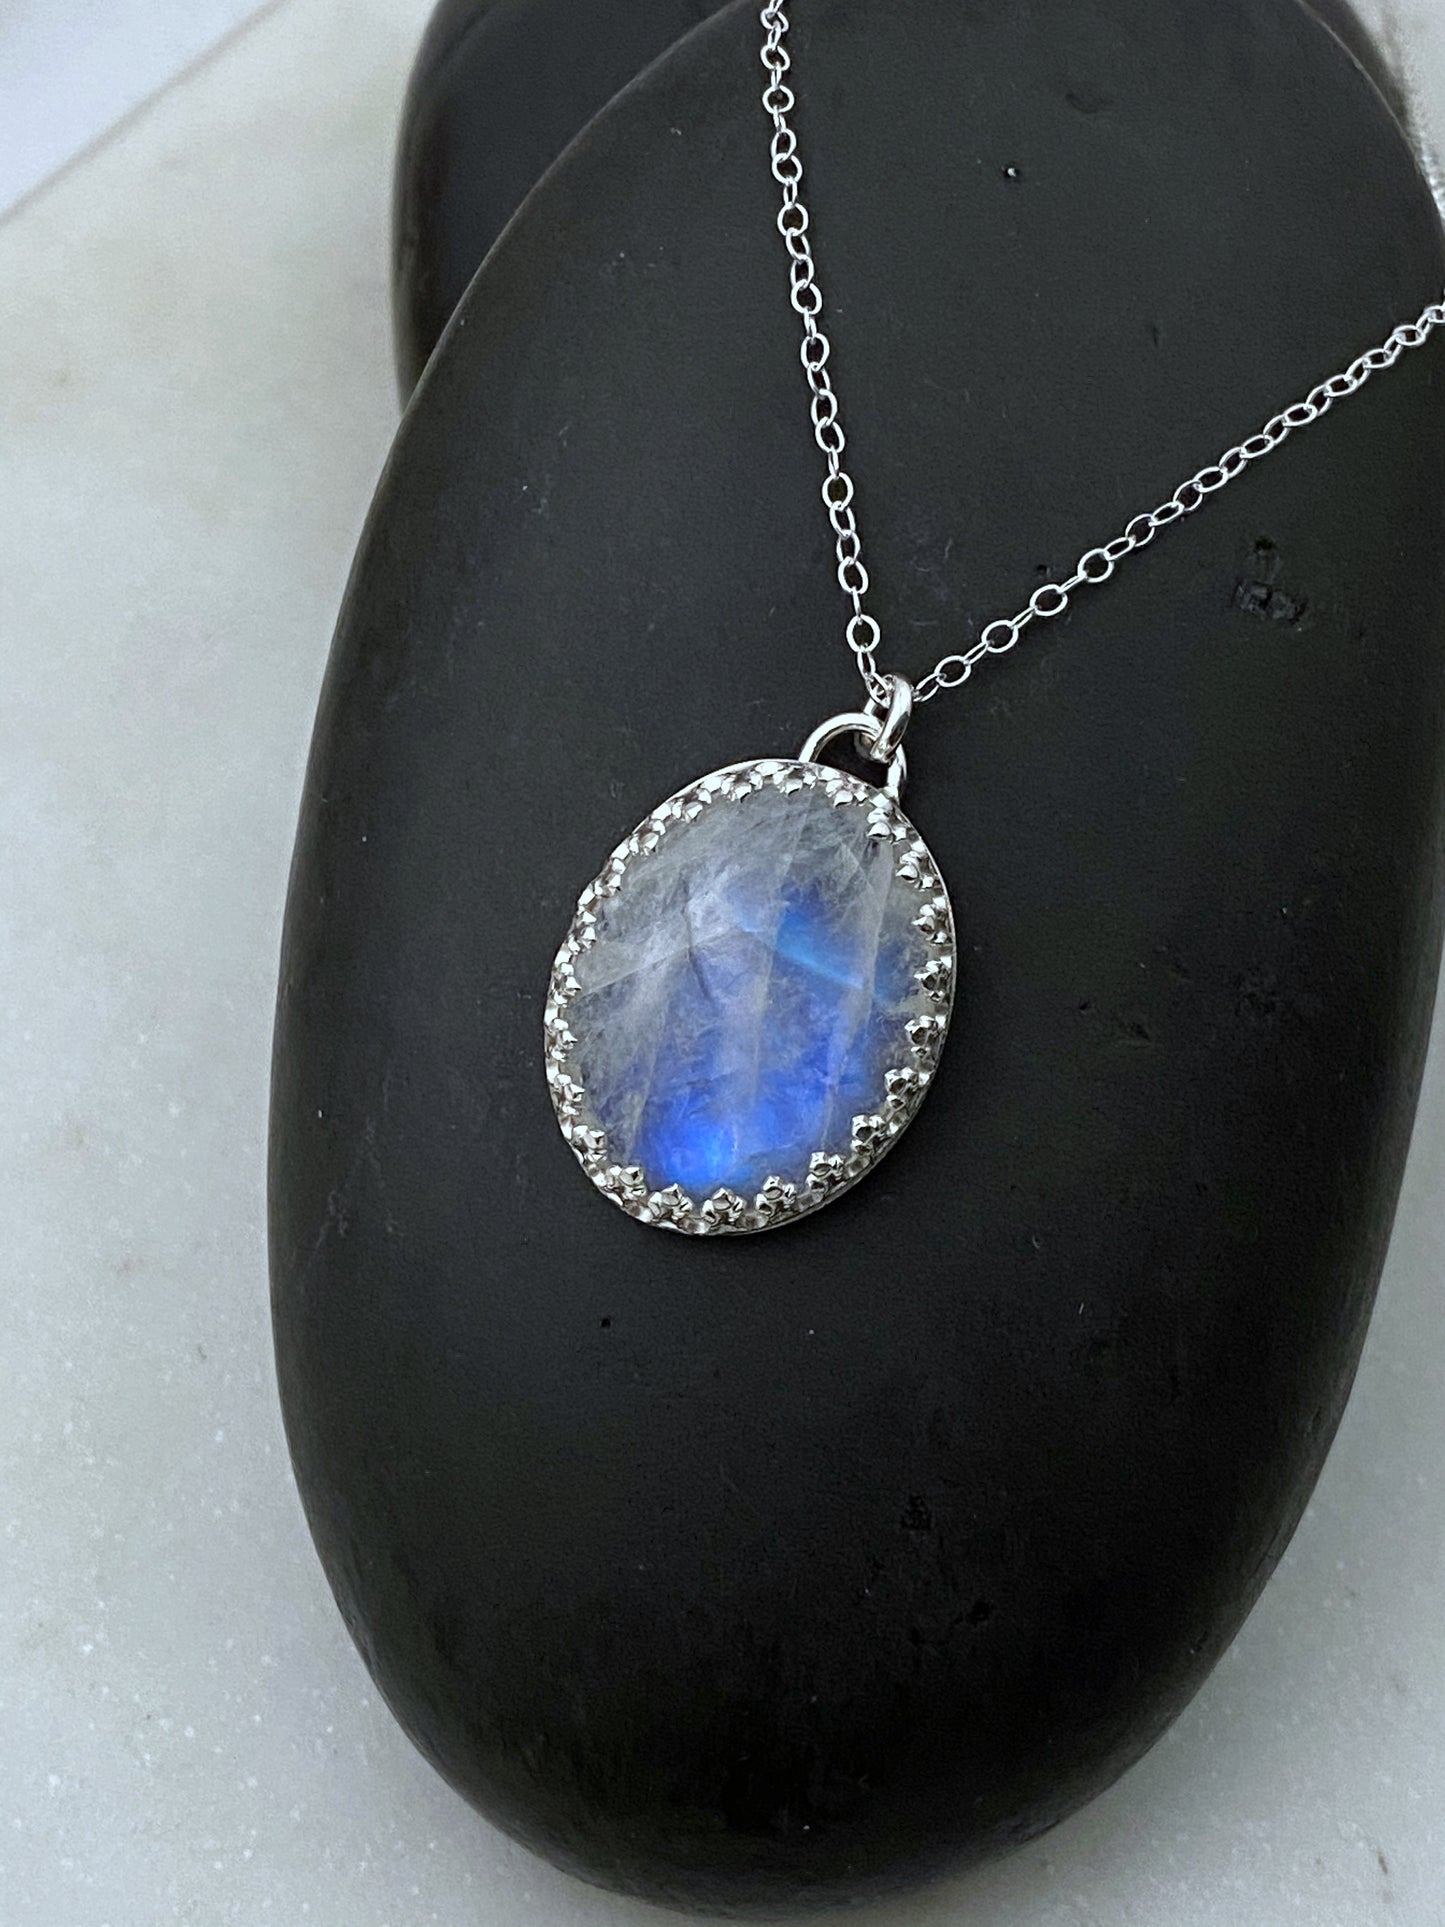 Moonstone and sterling silver necklace